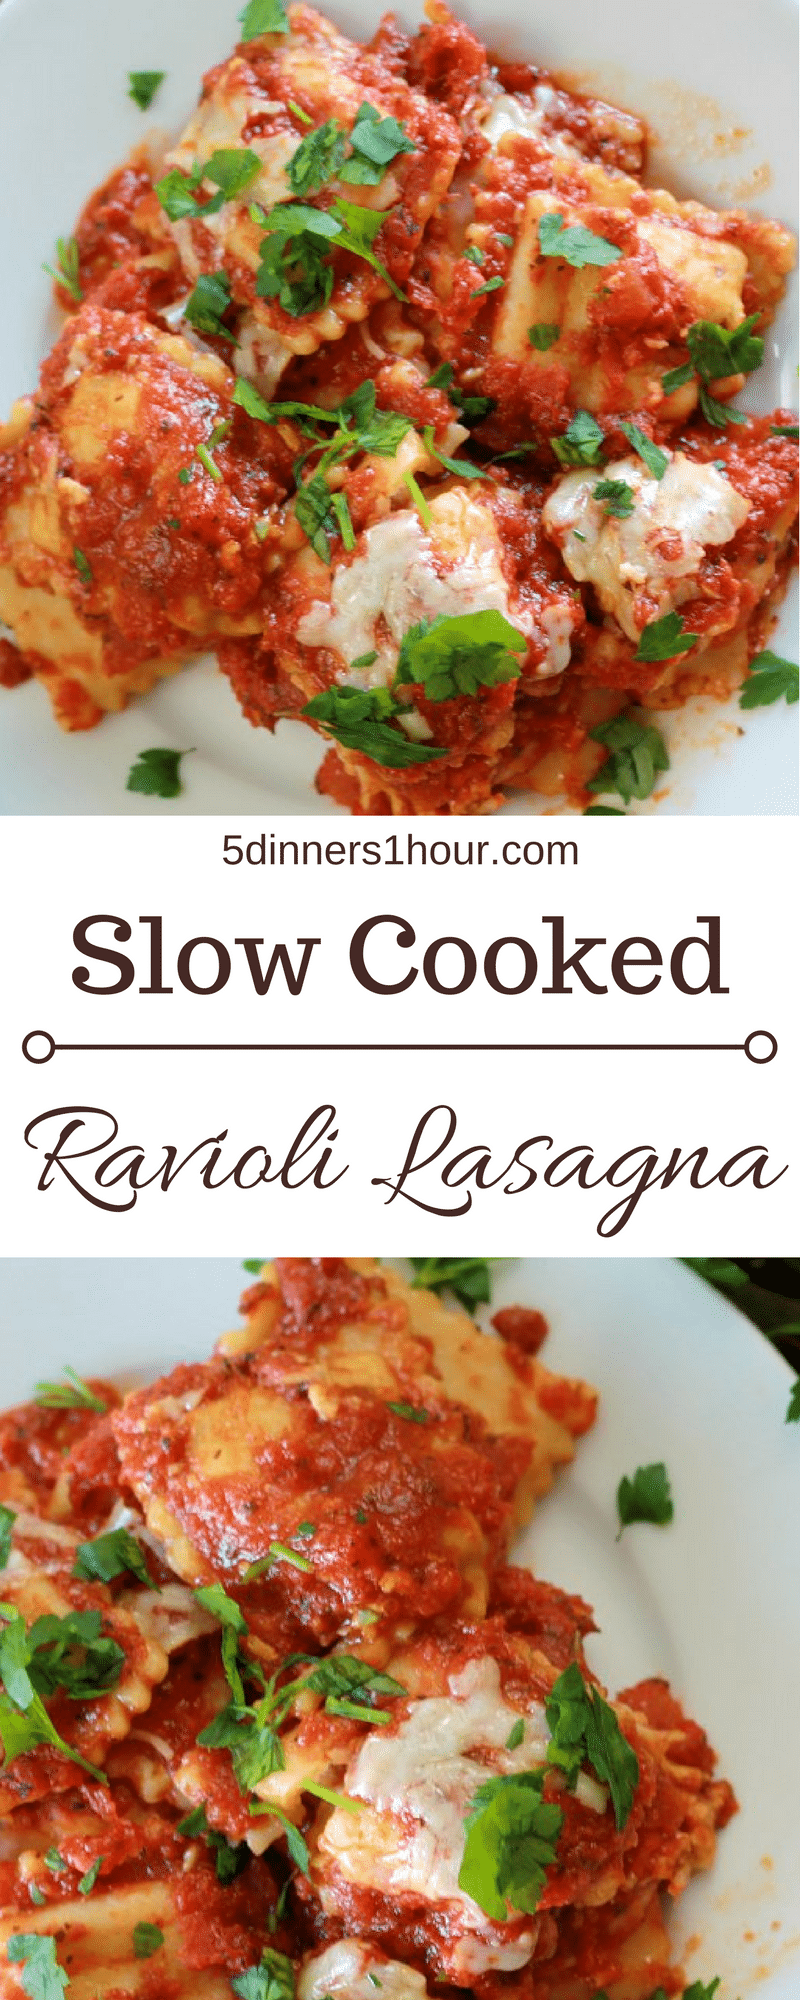 Slow Cooker Ravioli Lasagna!! Slow Cooker Ravioli "Lasagna"?!?!? Yes that is right!! | 5dinners1hour.com